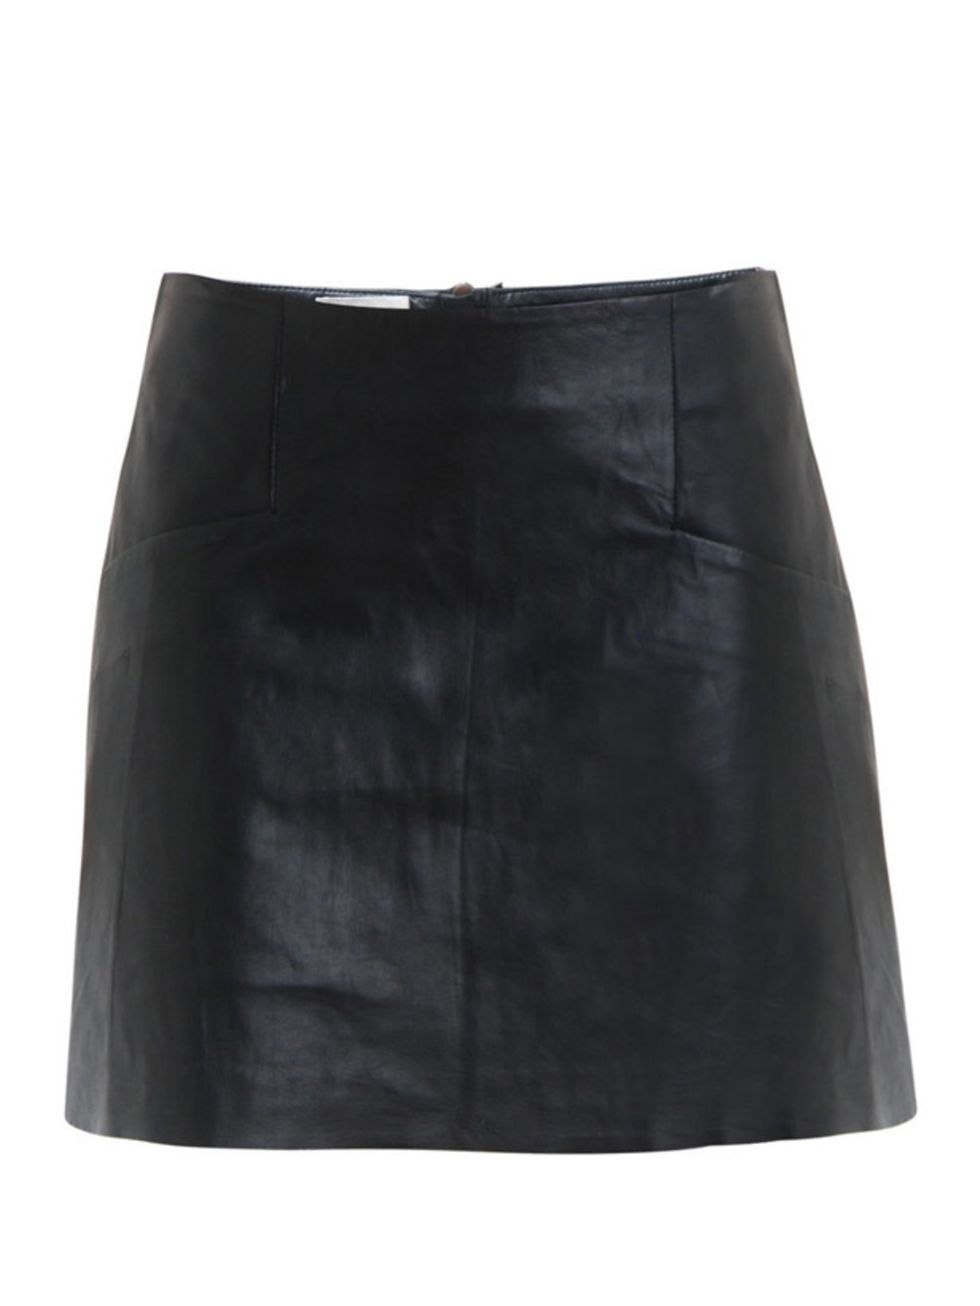 <p>Acne leather a-line skirt, £468.00, available at<a href="http://www.matchesfashion.com/fcp/product/Matches-Fashion//acne-ACNE-Y-DALI-LEATHER-skirts-BLACK/39192"> matches </a></p>